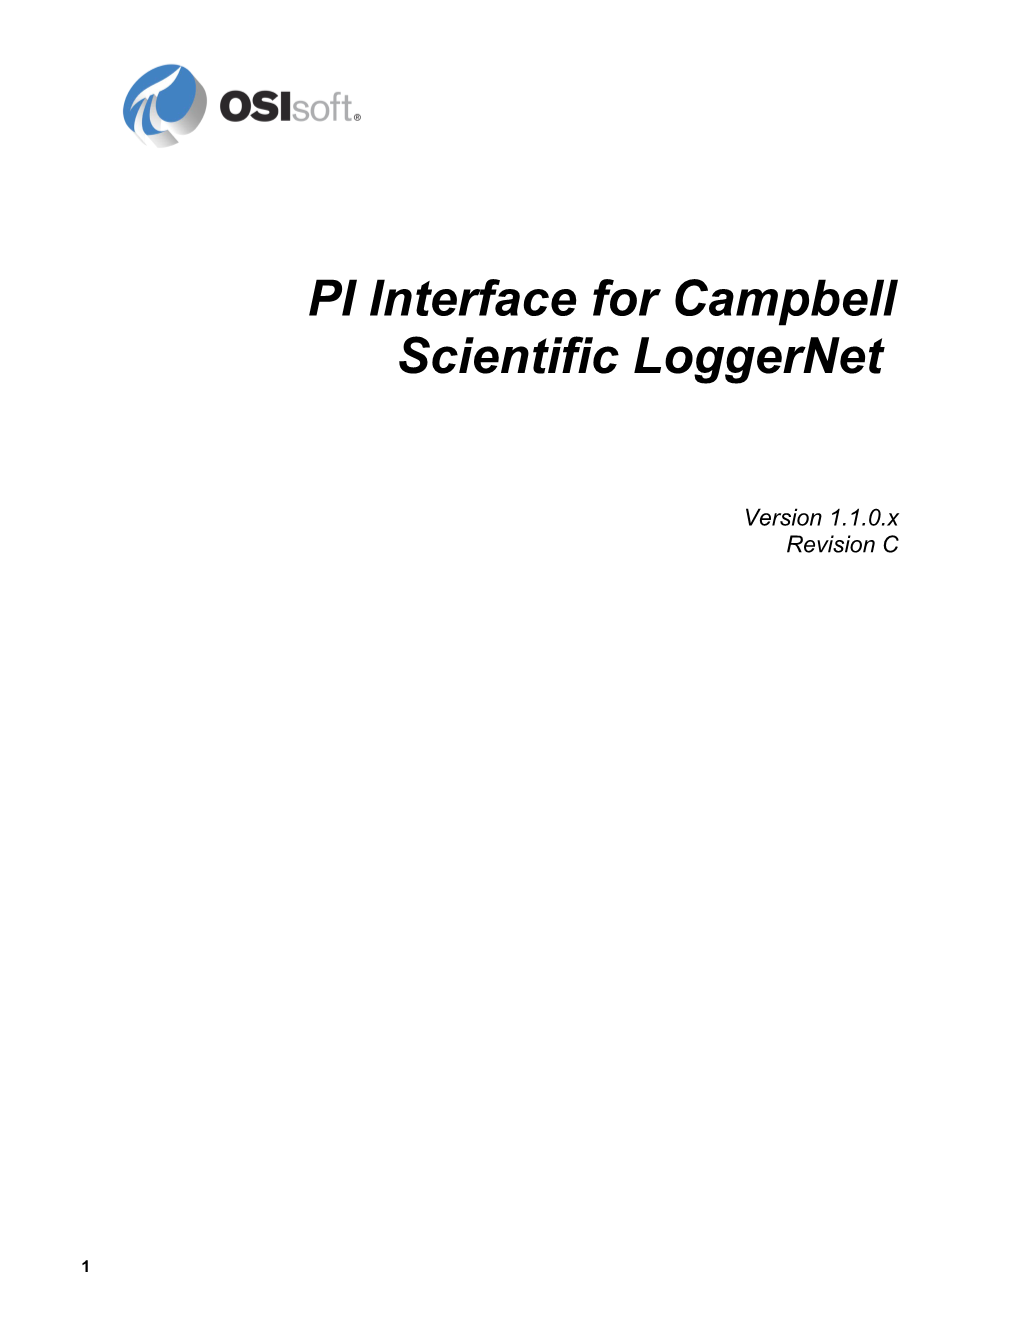 PI Interface for Campbell Scientific Loggernet